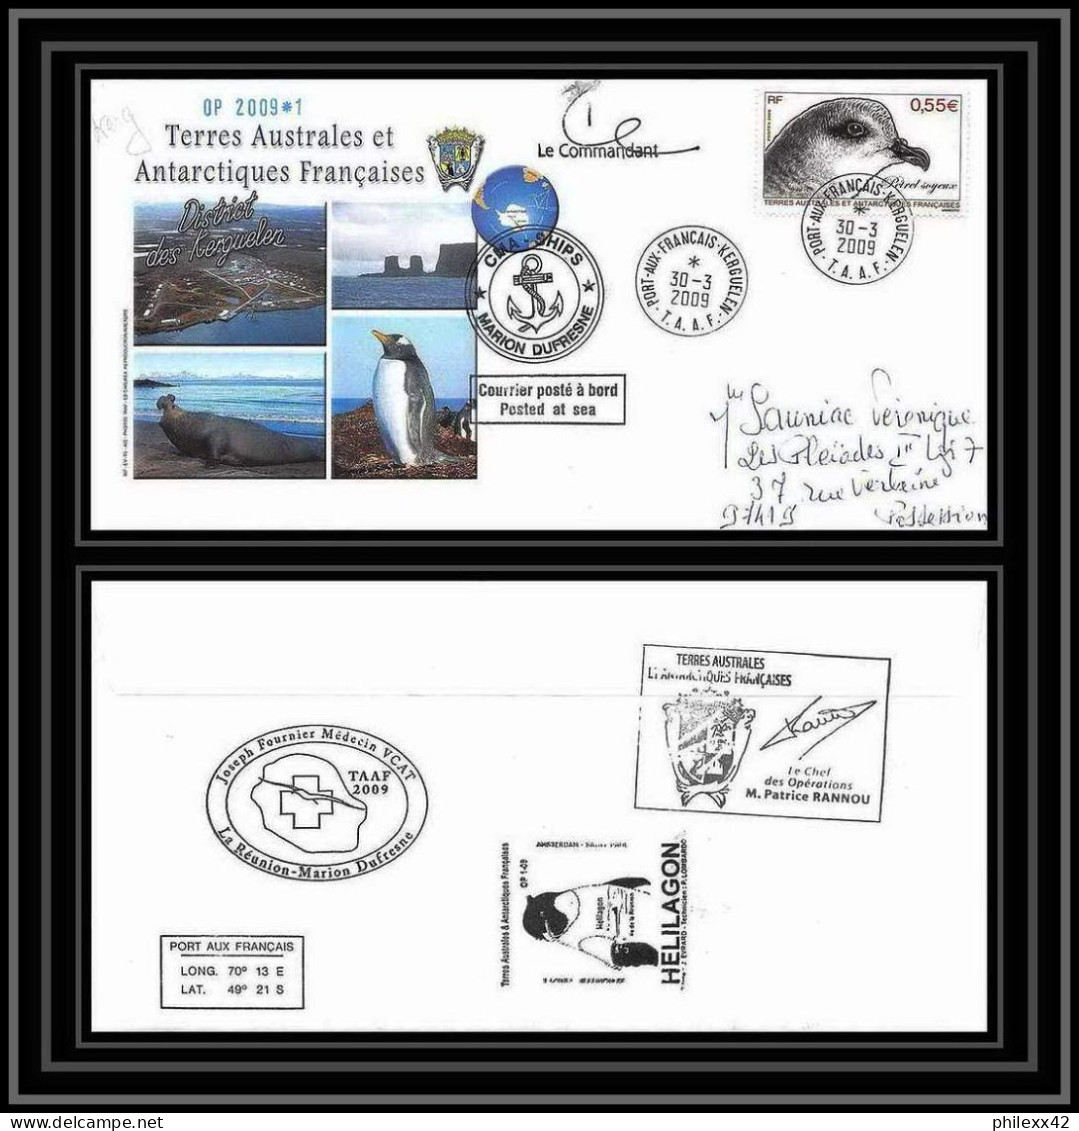 2897 Helilagon Dufresne Signé Signed OP 2009/1 KERGUELEN 30/3/2009 N°535 ANTARCTIC Terres Australes (taaf) Lettre Cover - Helicopters